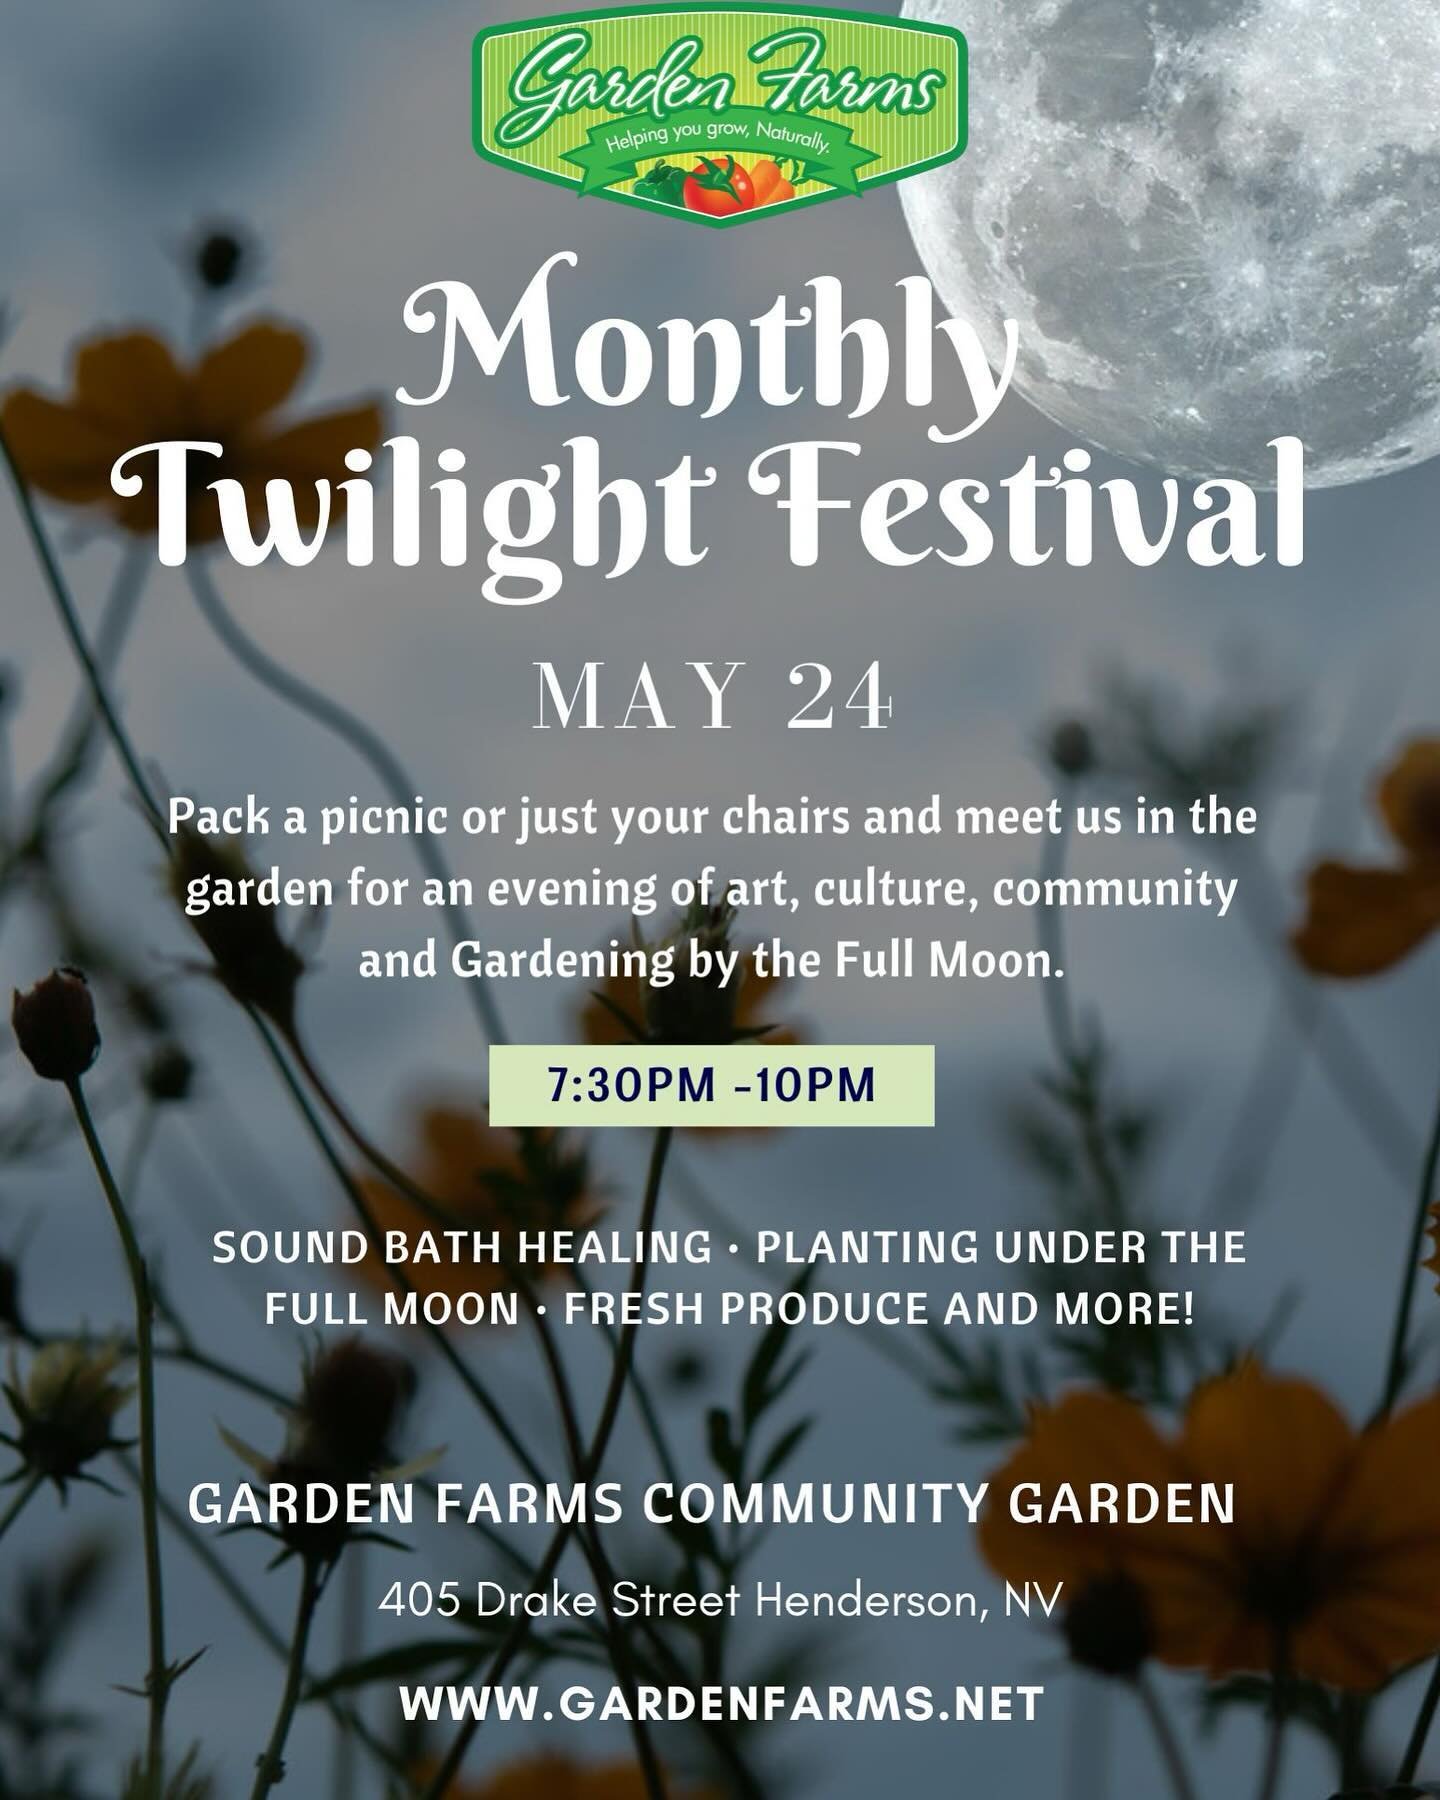 Looking to get more in tune with the natural world? What better way than to gather under the full moon with Garden Farms to celebrate the lunar influences on the garden?🌕🌱

Our practice of Gardening by the Moon, is built on a foundation of science,